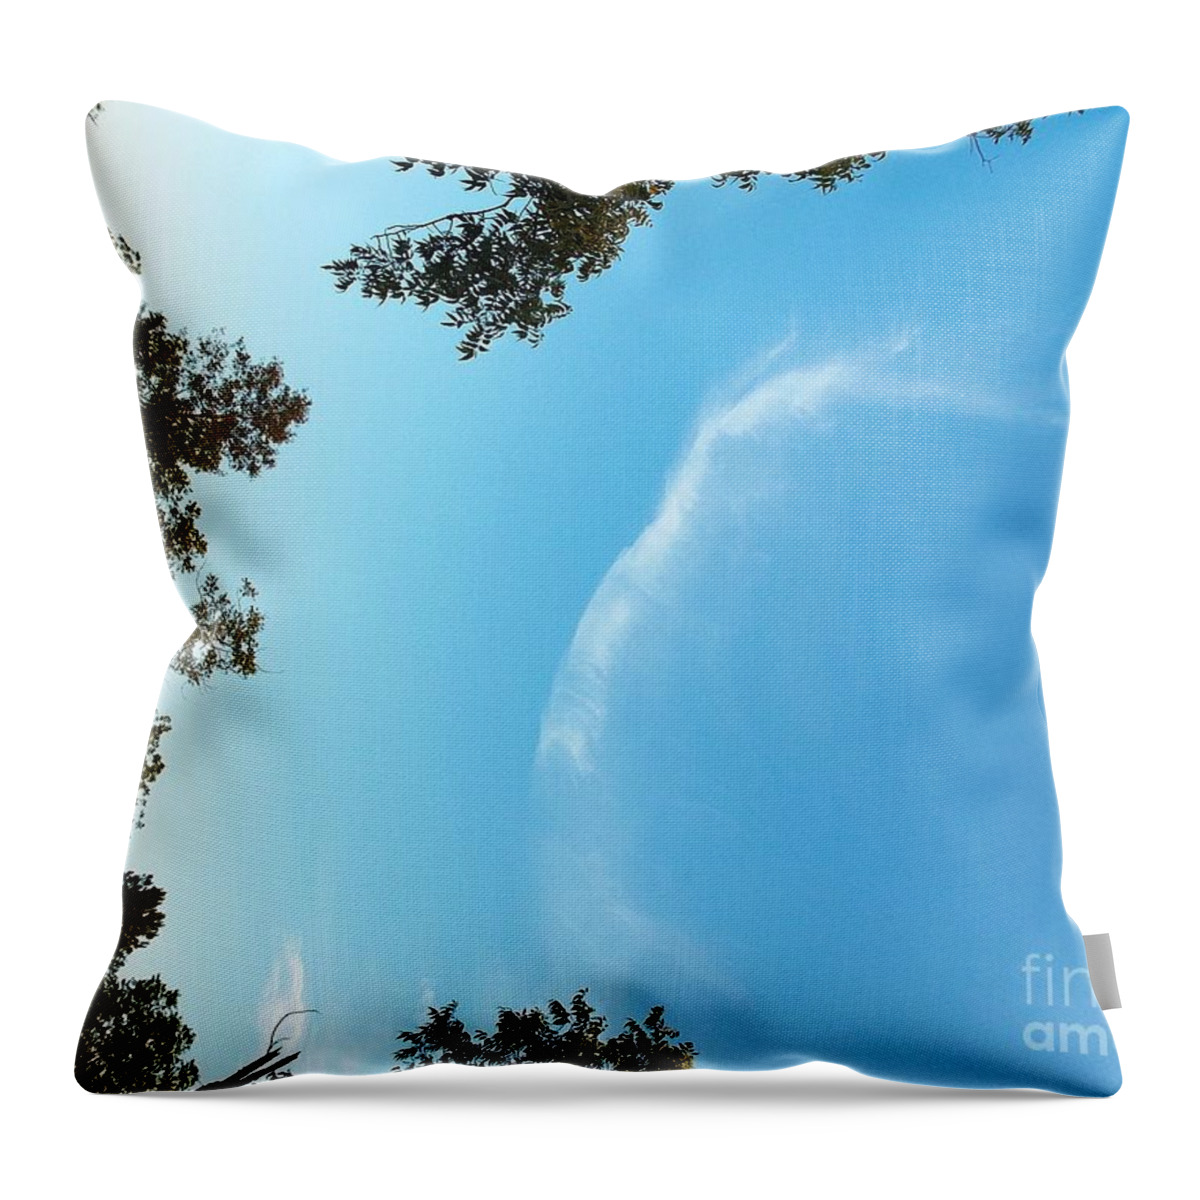 Angel Throw Pillow featuring the photograph Reaching Out Over Meadow by Matthew Seufer